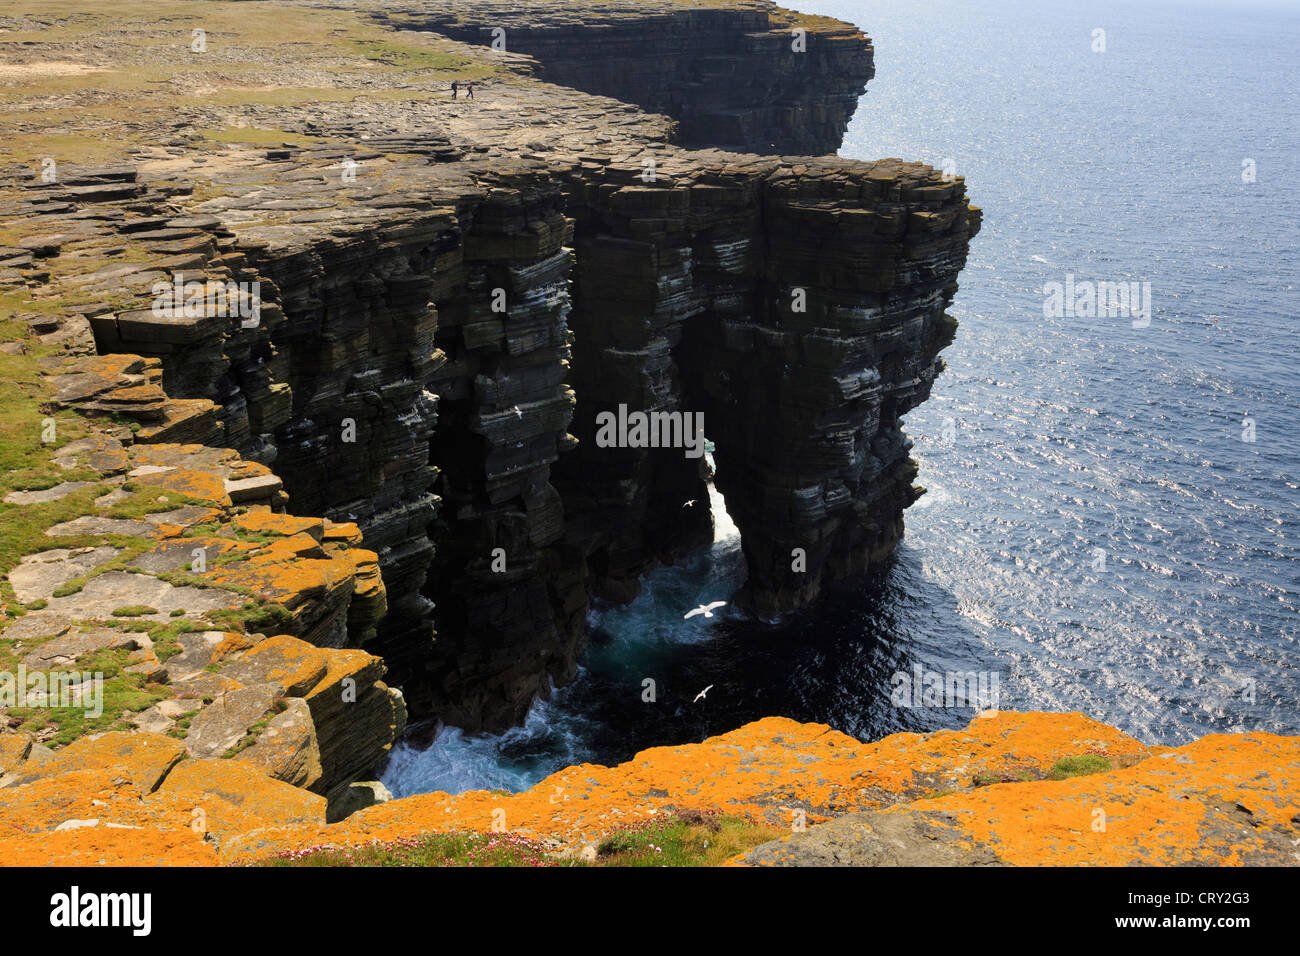 View of dramatic seacliffs with colony of seabirds nesting on ledges at Noup Head Westray Island Orkney Islands Scotland UK Stock Photo